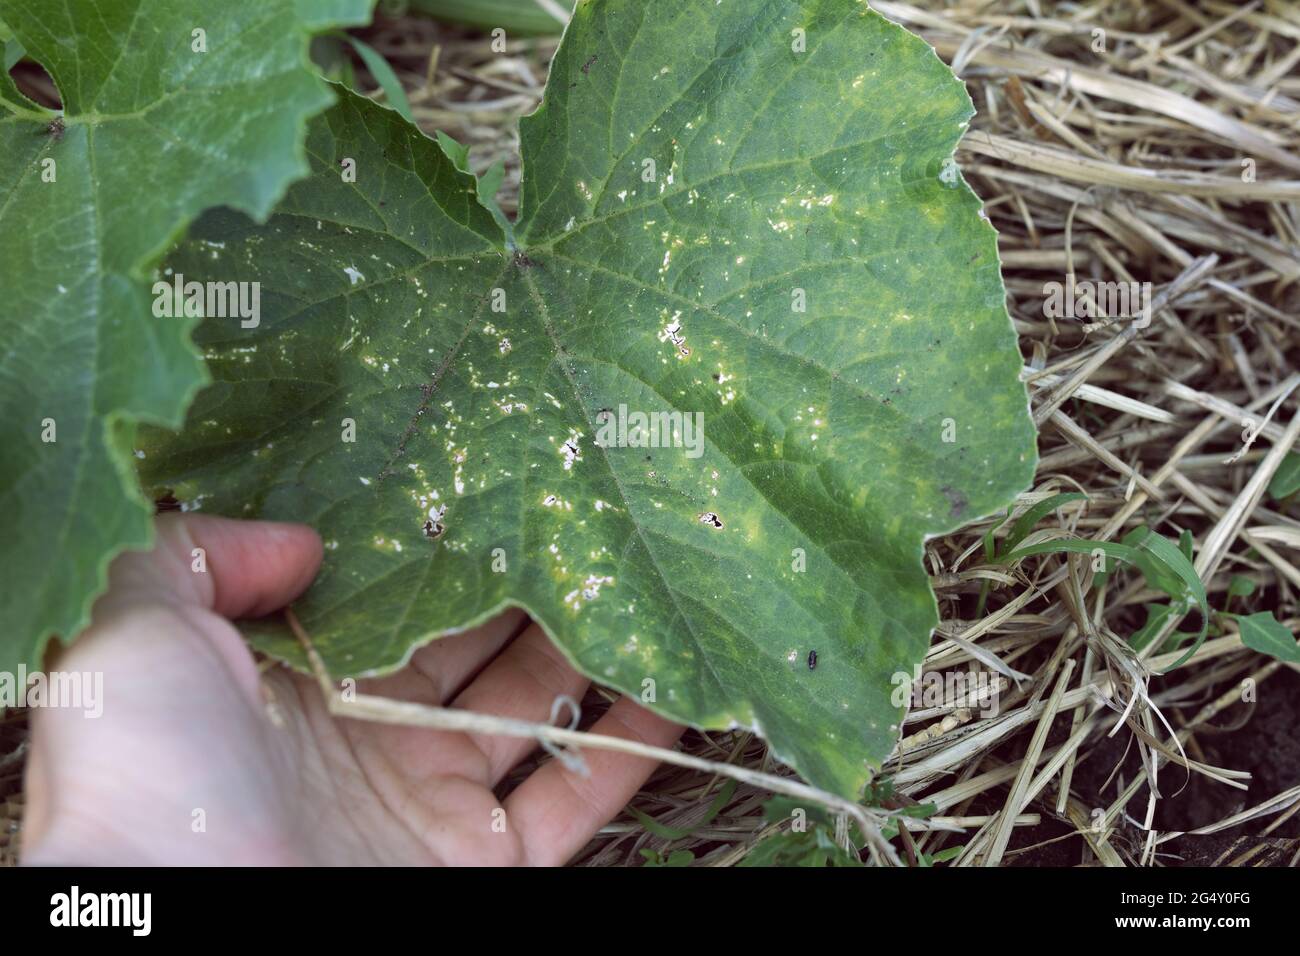 Holes on green leaves bitten by pests. Chrysomelidae leaf beetle eats green leaves, damaging agriculture. Cruciferous flea Stock Photo